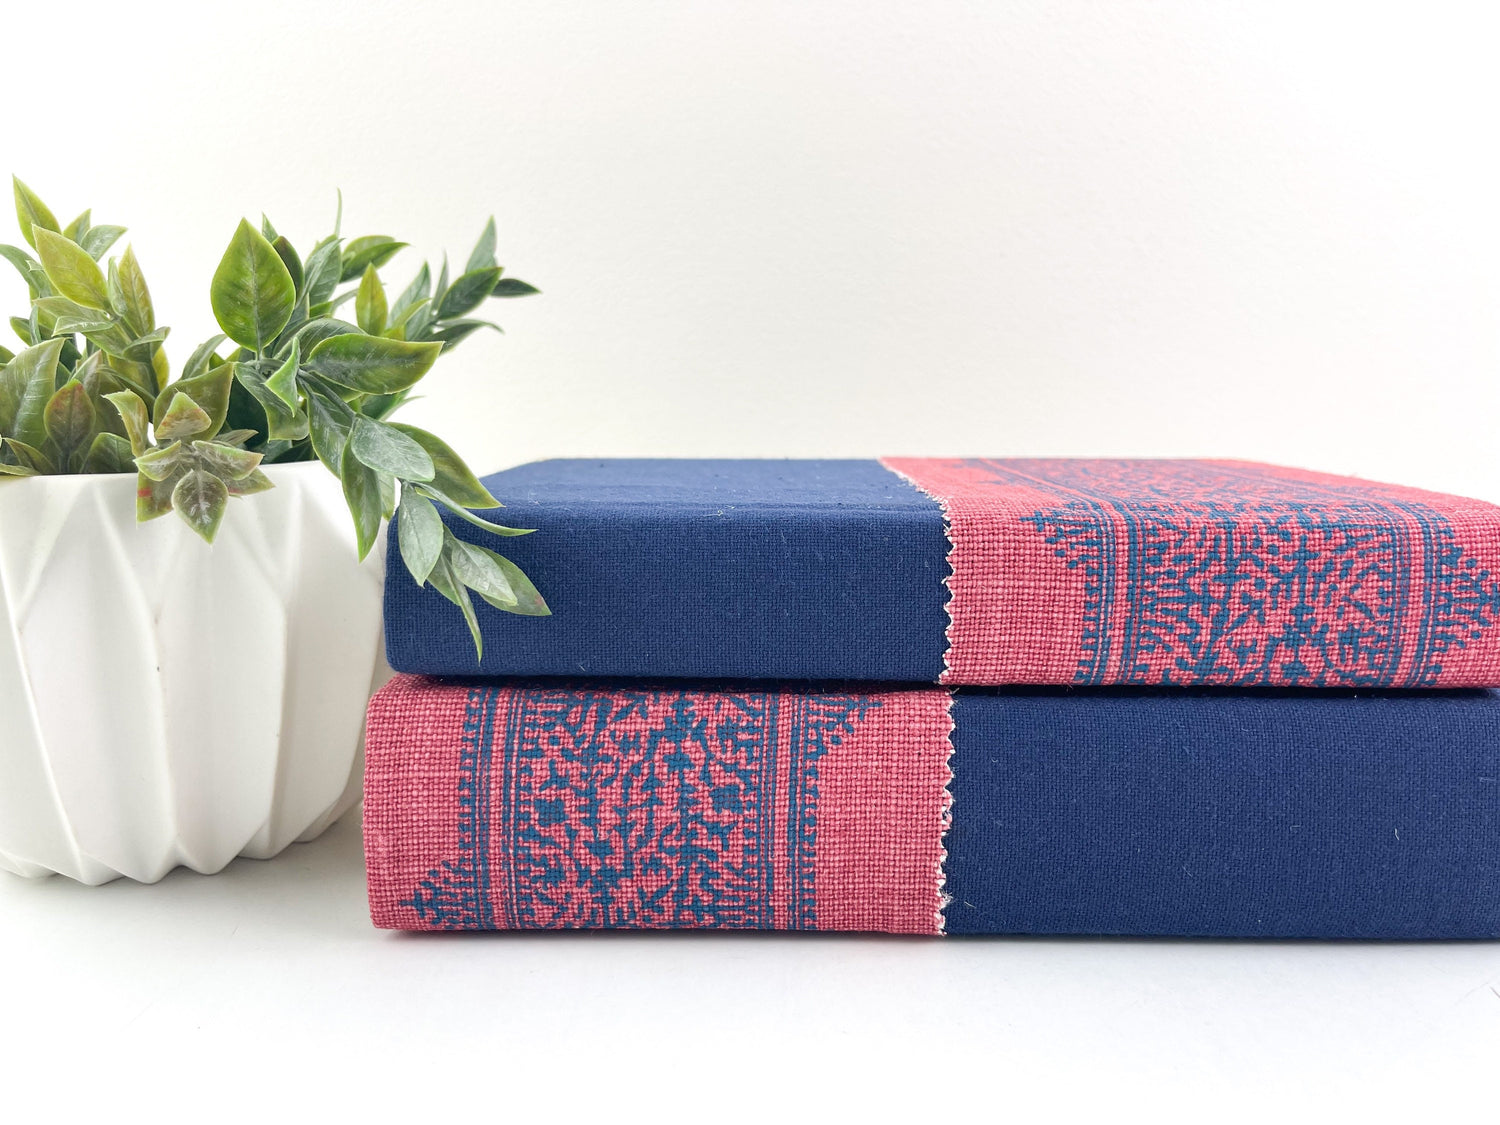 Blue and Red Fabric Covered Books